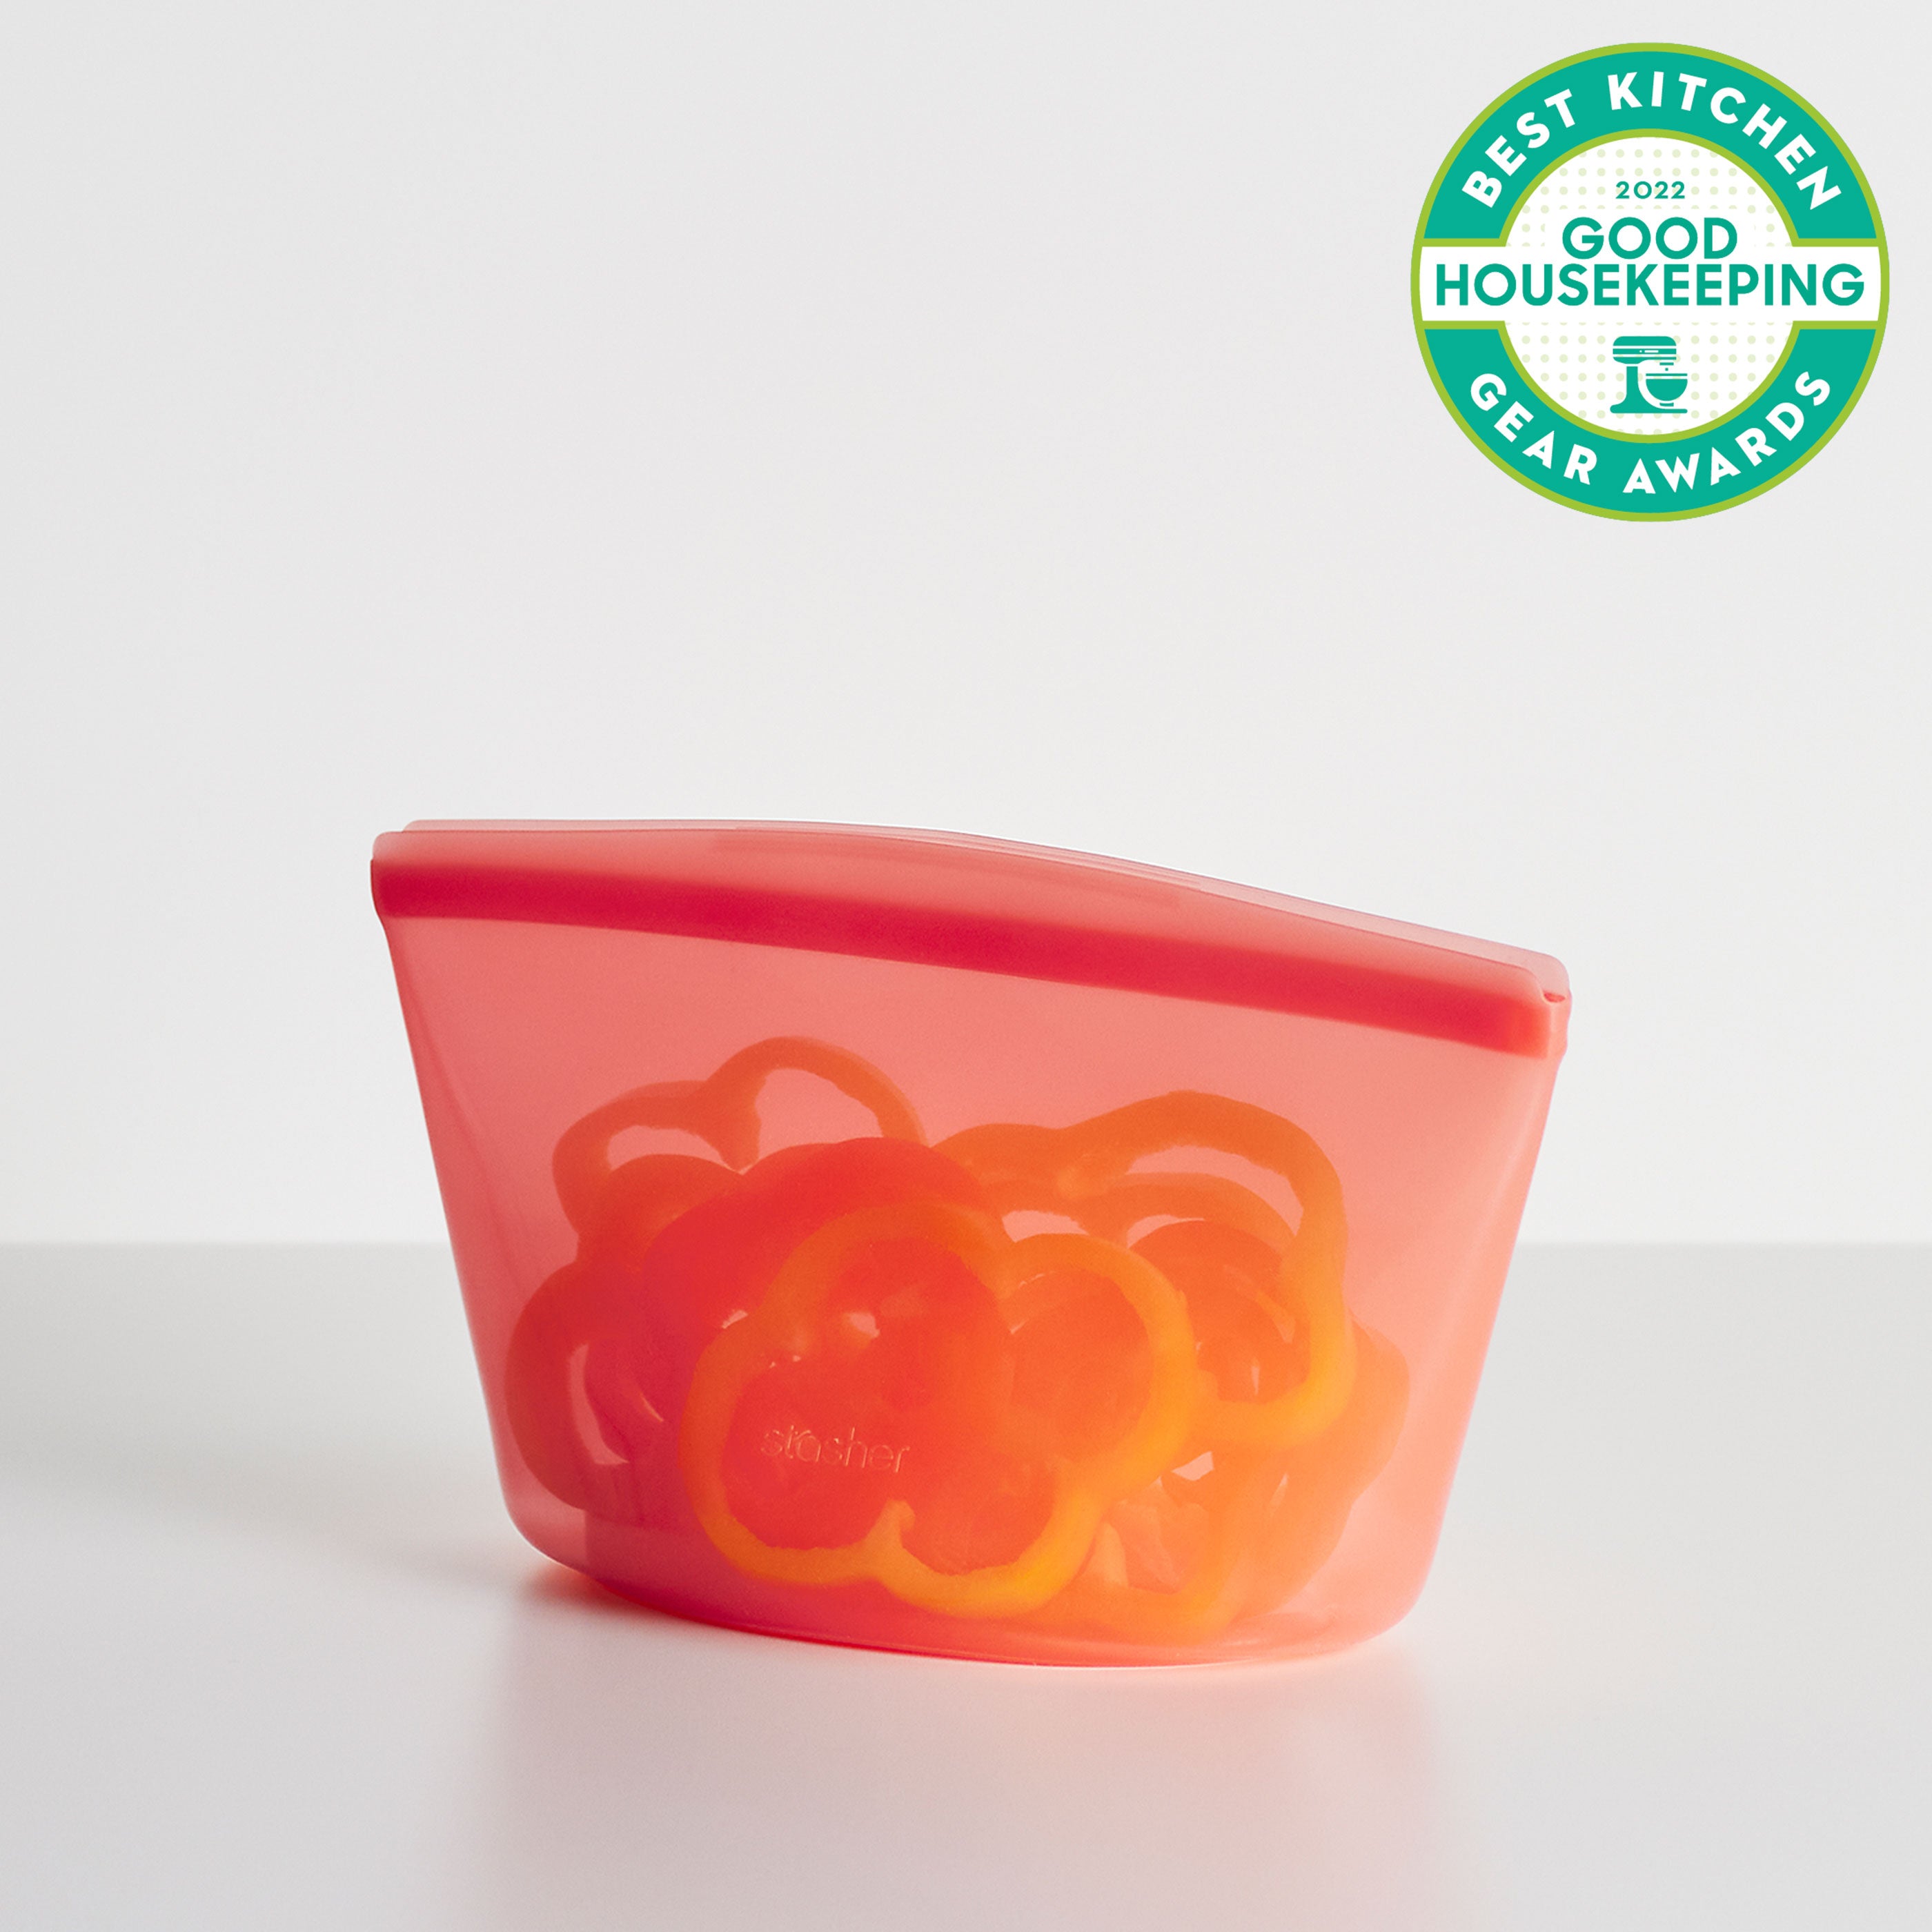 Stasher 6-Cup Bowl in Red | Silicone